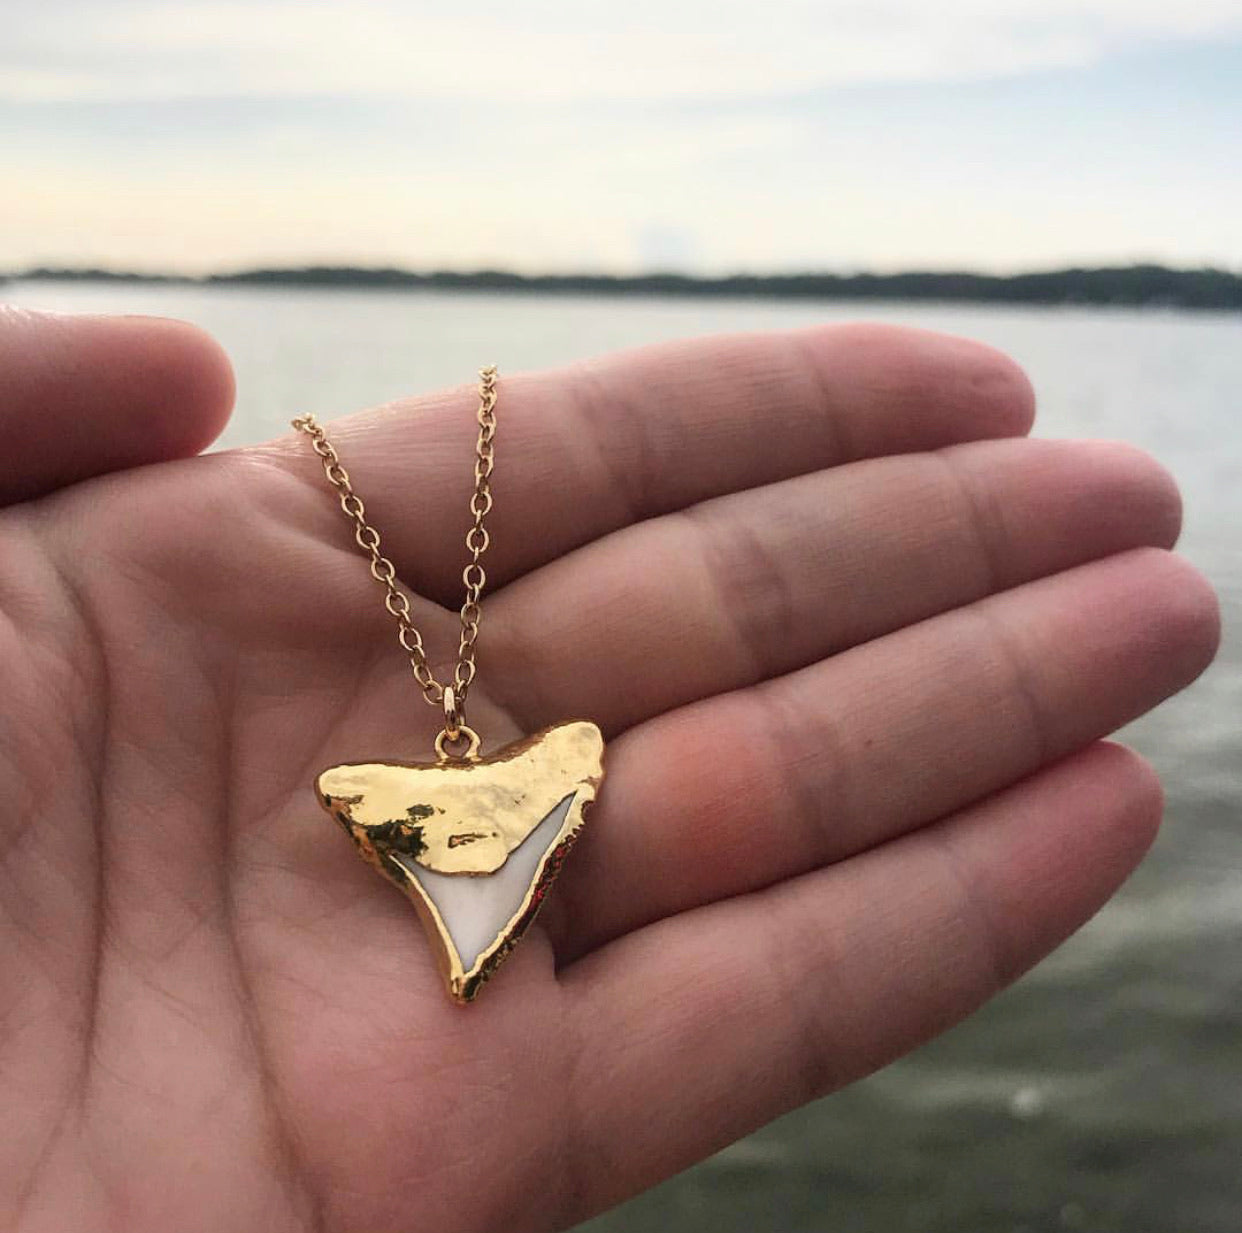 Buy Dainty Shark Tooth Necklace, Real Shark Tooth Pendant, Gold Shark Tooth  Necklace, Delicate Gold Necklace, Fossilized Shark Tooth Necklace Online in  India - Etsy